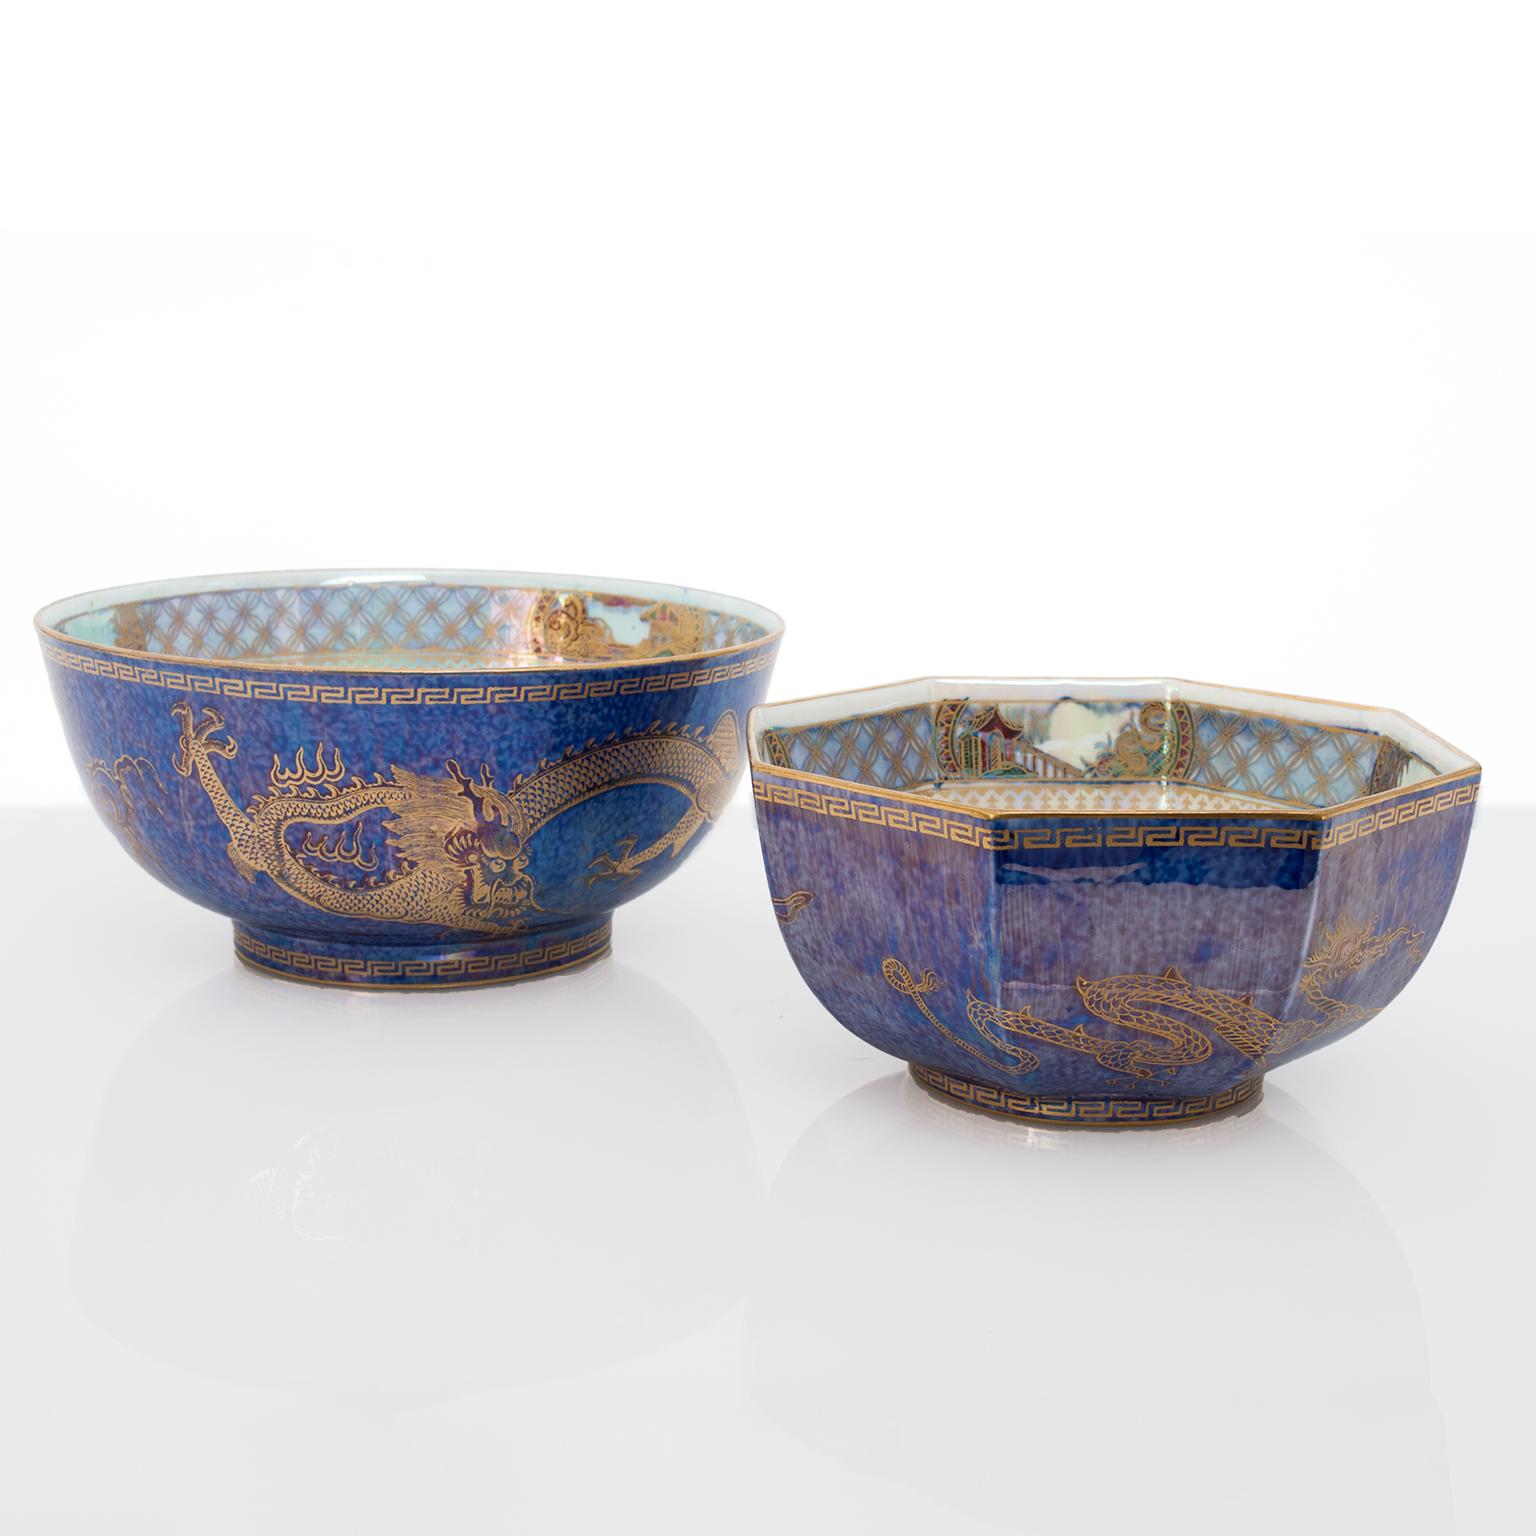 Two very finely decorated Wedgwood Fairyland Lustre bowls designed by Daisy Makeig-Jones. Both bowls depicts gold dragons on the exterior, a blue and gold dragon at the inside center with 3 smaller dragons. Excellent condition, diameter: 8.25